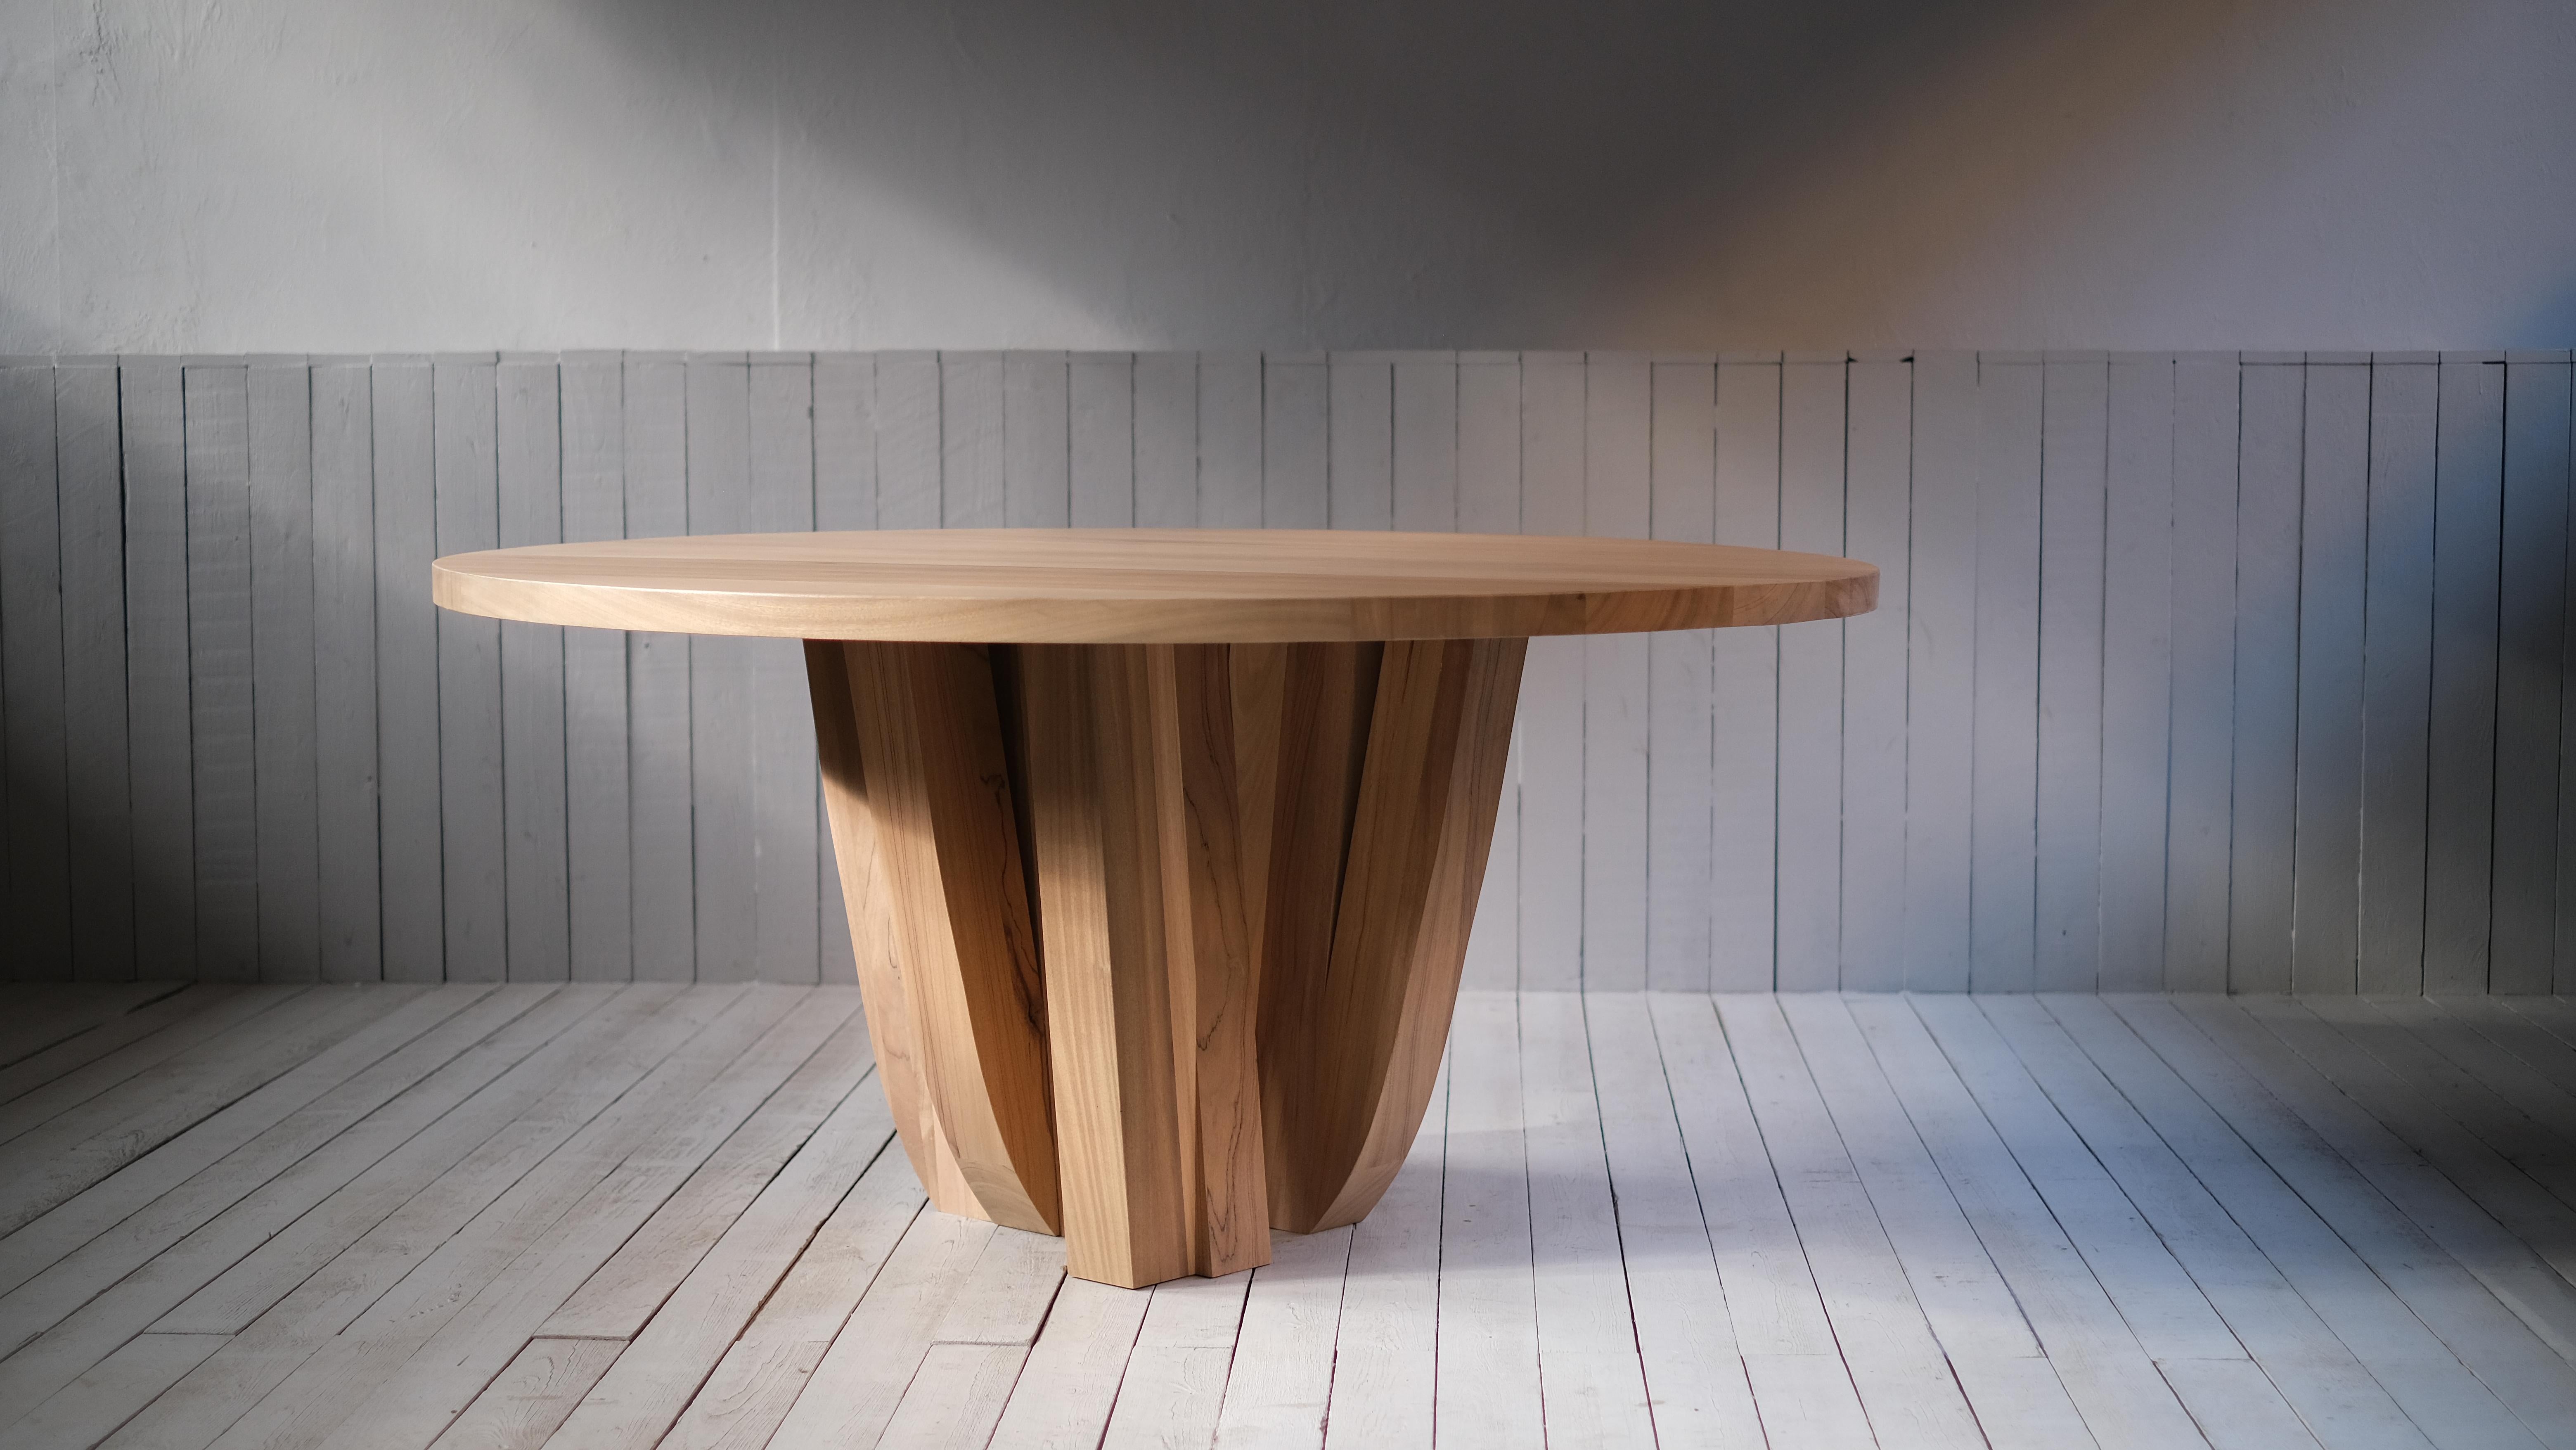 Zoumey round table by Arno Declercq
Dimensions: diameter 160 x H 75 cm
Materials: African walnut

A forest of table legs made out of 16 pieces of African walnut.
A dining table for 6 persons

Arno Declercq
Belgian designer and art dealer who